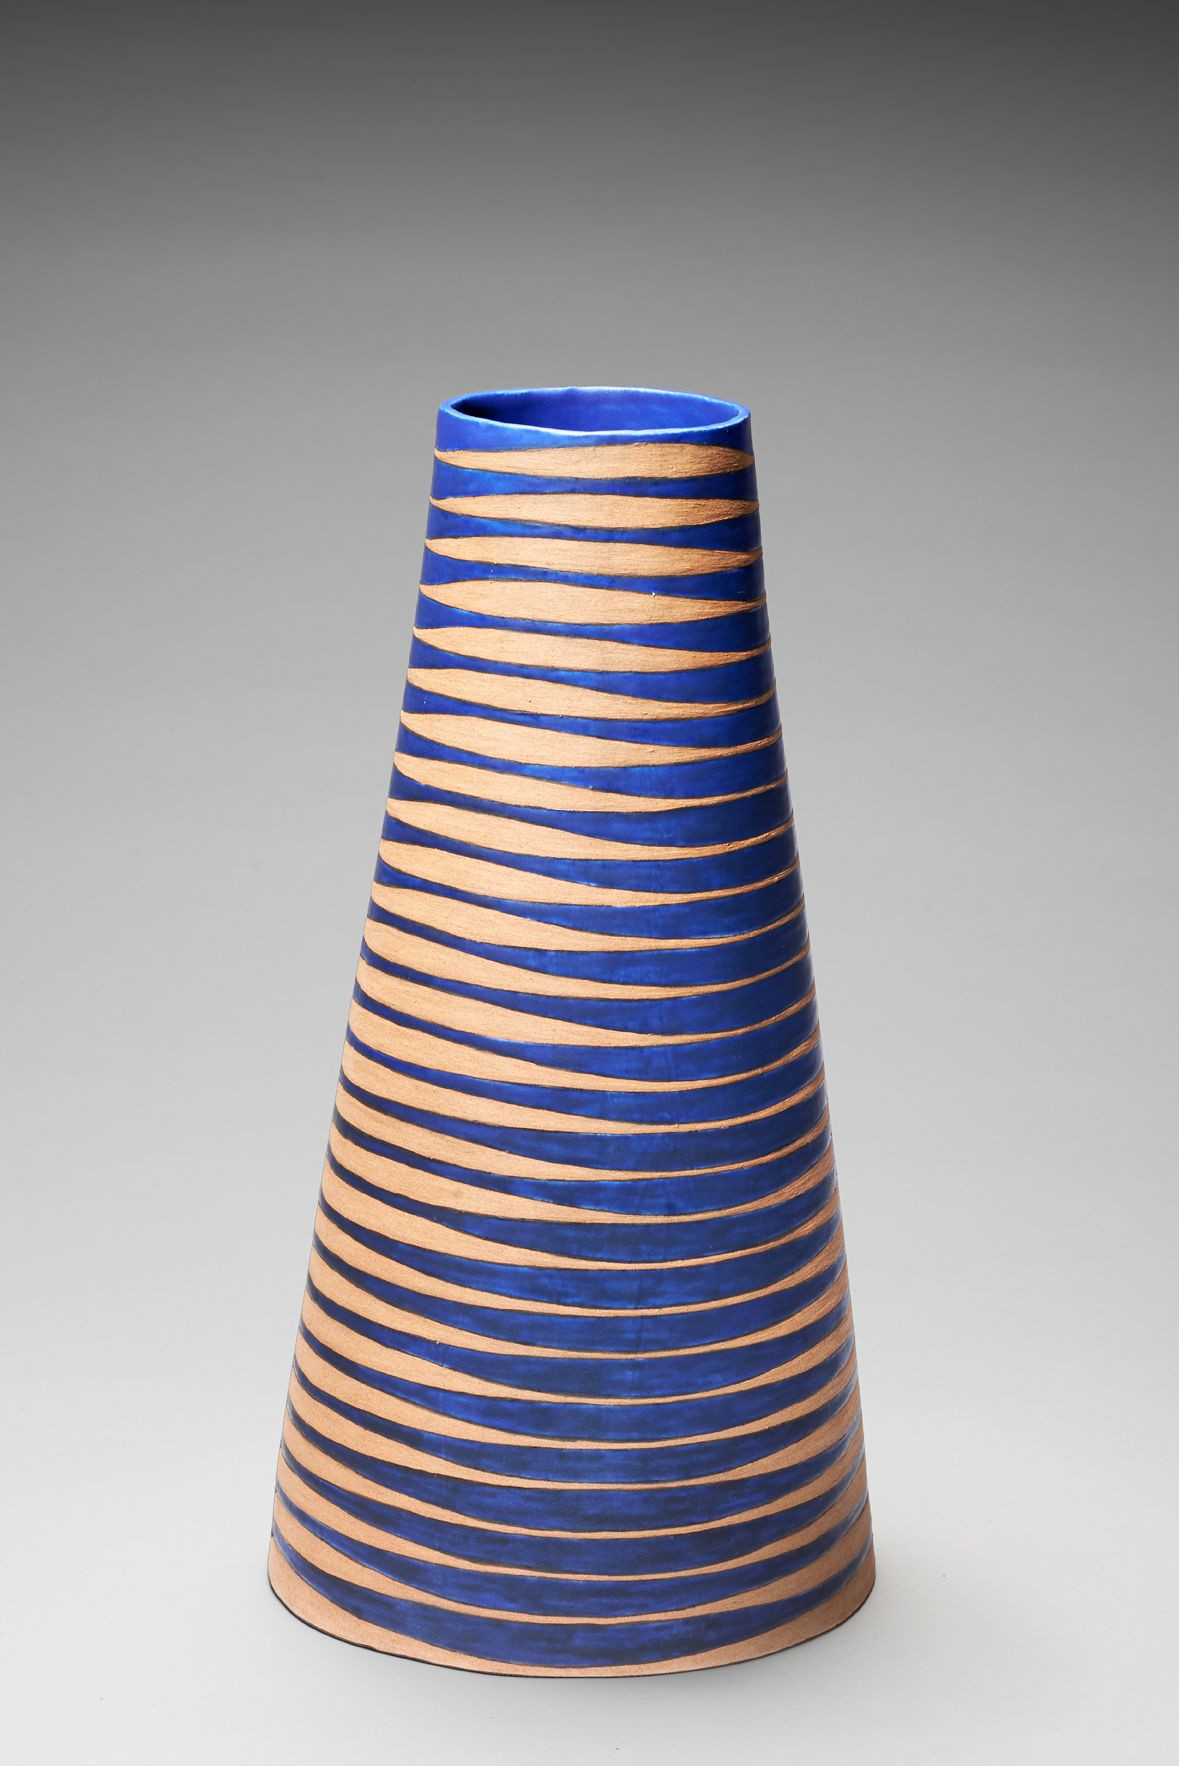 17 Fashionable Blue Ceramic Vase 2024 free download blue ceramic vase of the undulating lines on this oval vase gives movement to the piece for the undulating lines on this oval vase gives movement to the piece